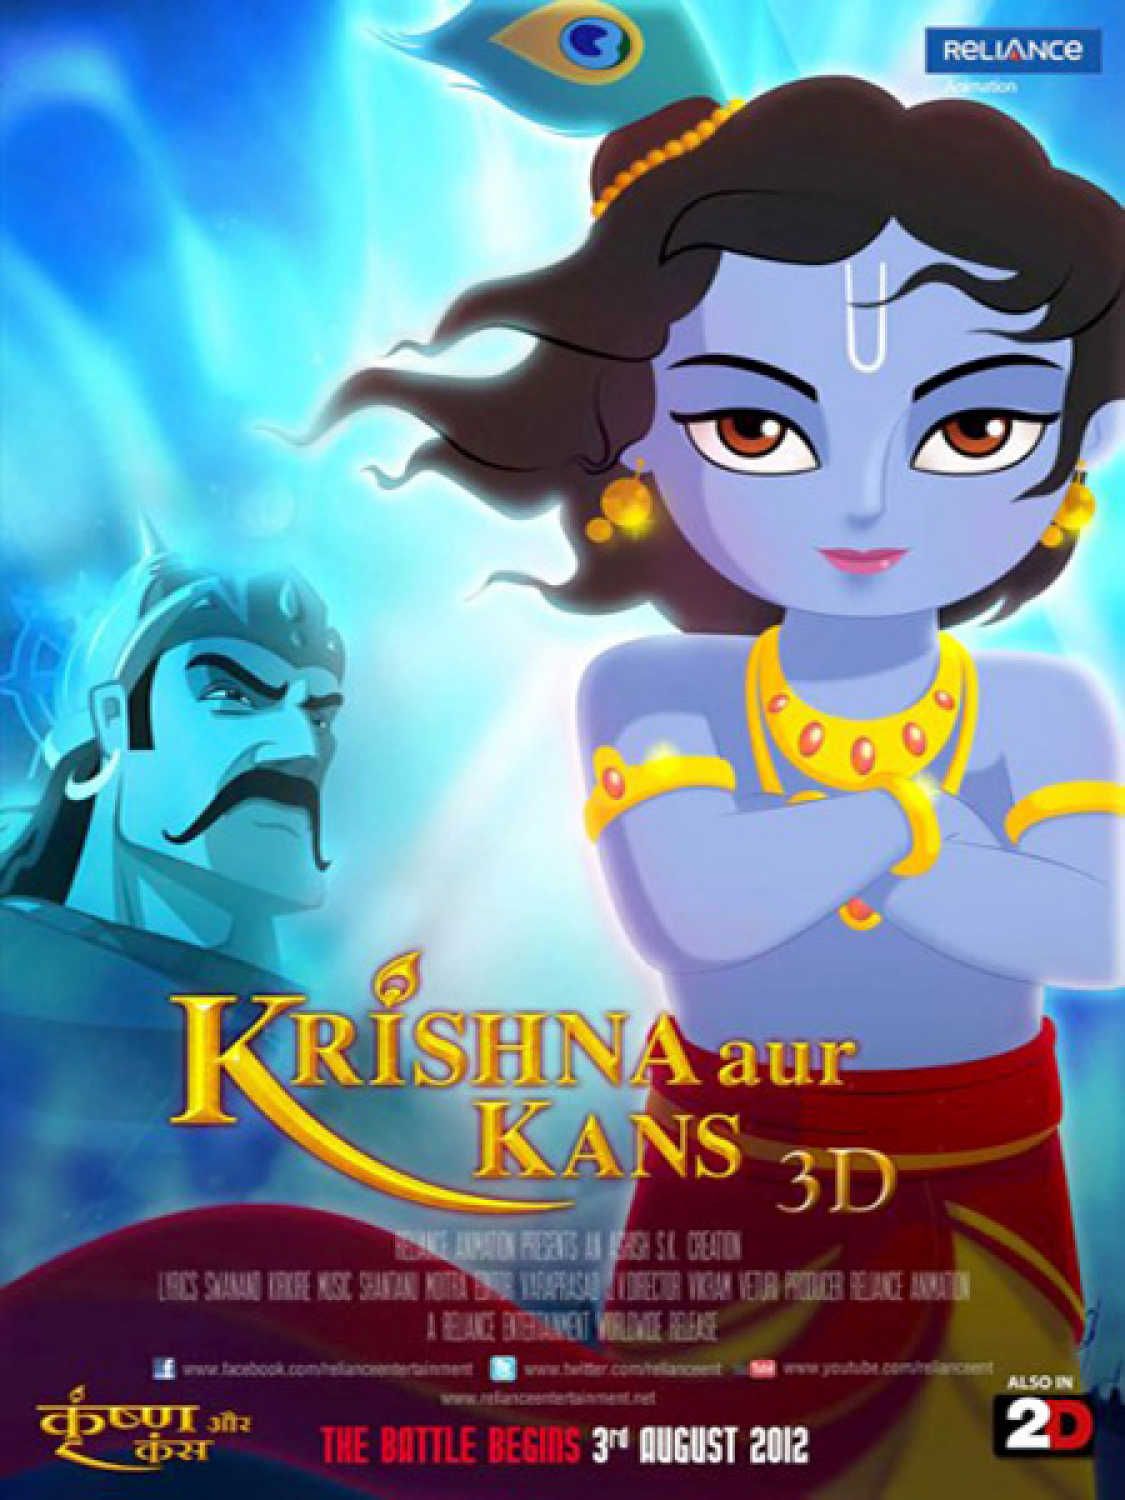 Krishna Aur Kans Movie: Review. Release Date. Songs. Music. Image. Official Trailers. Videos. Photo